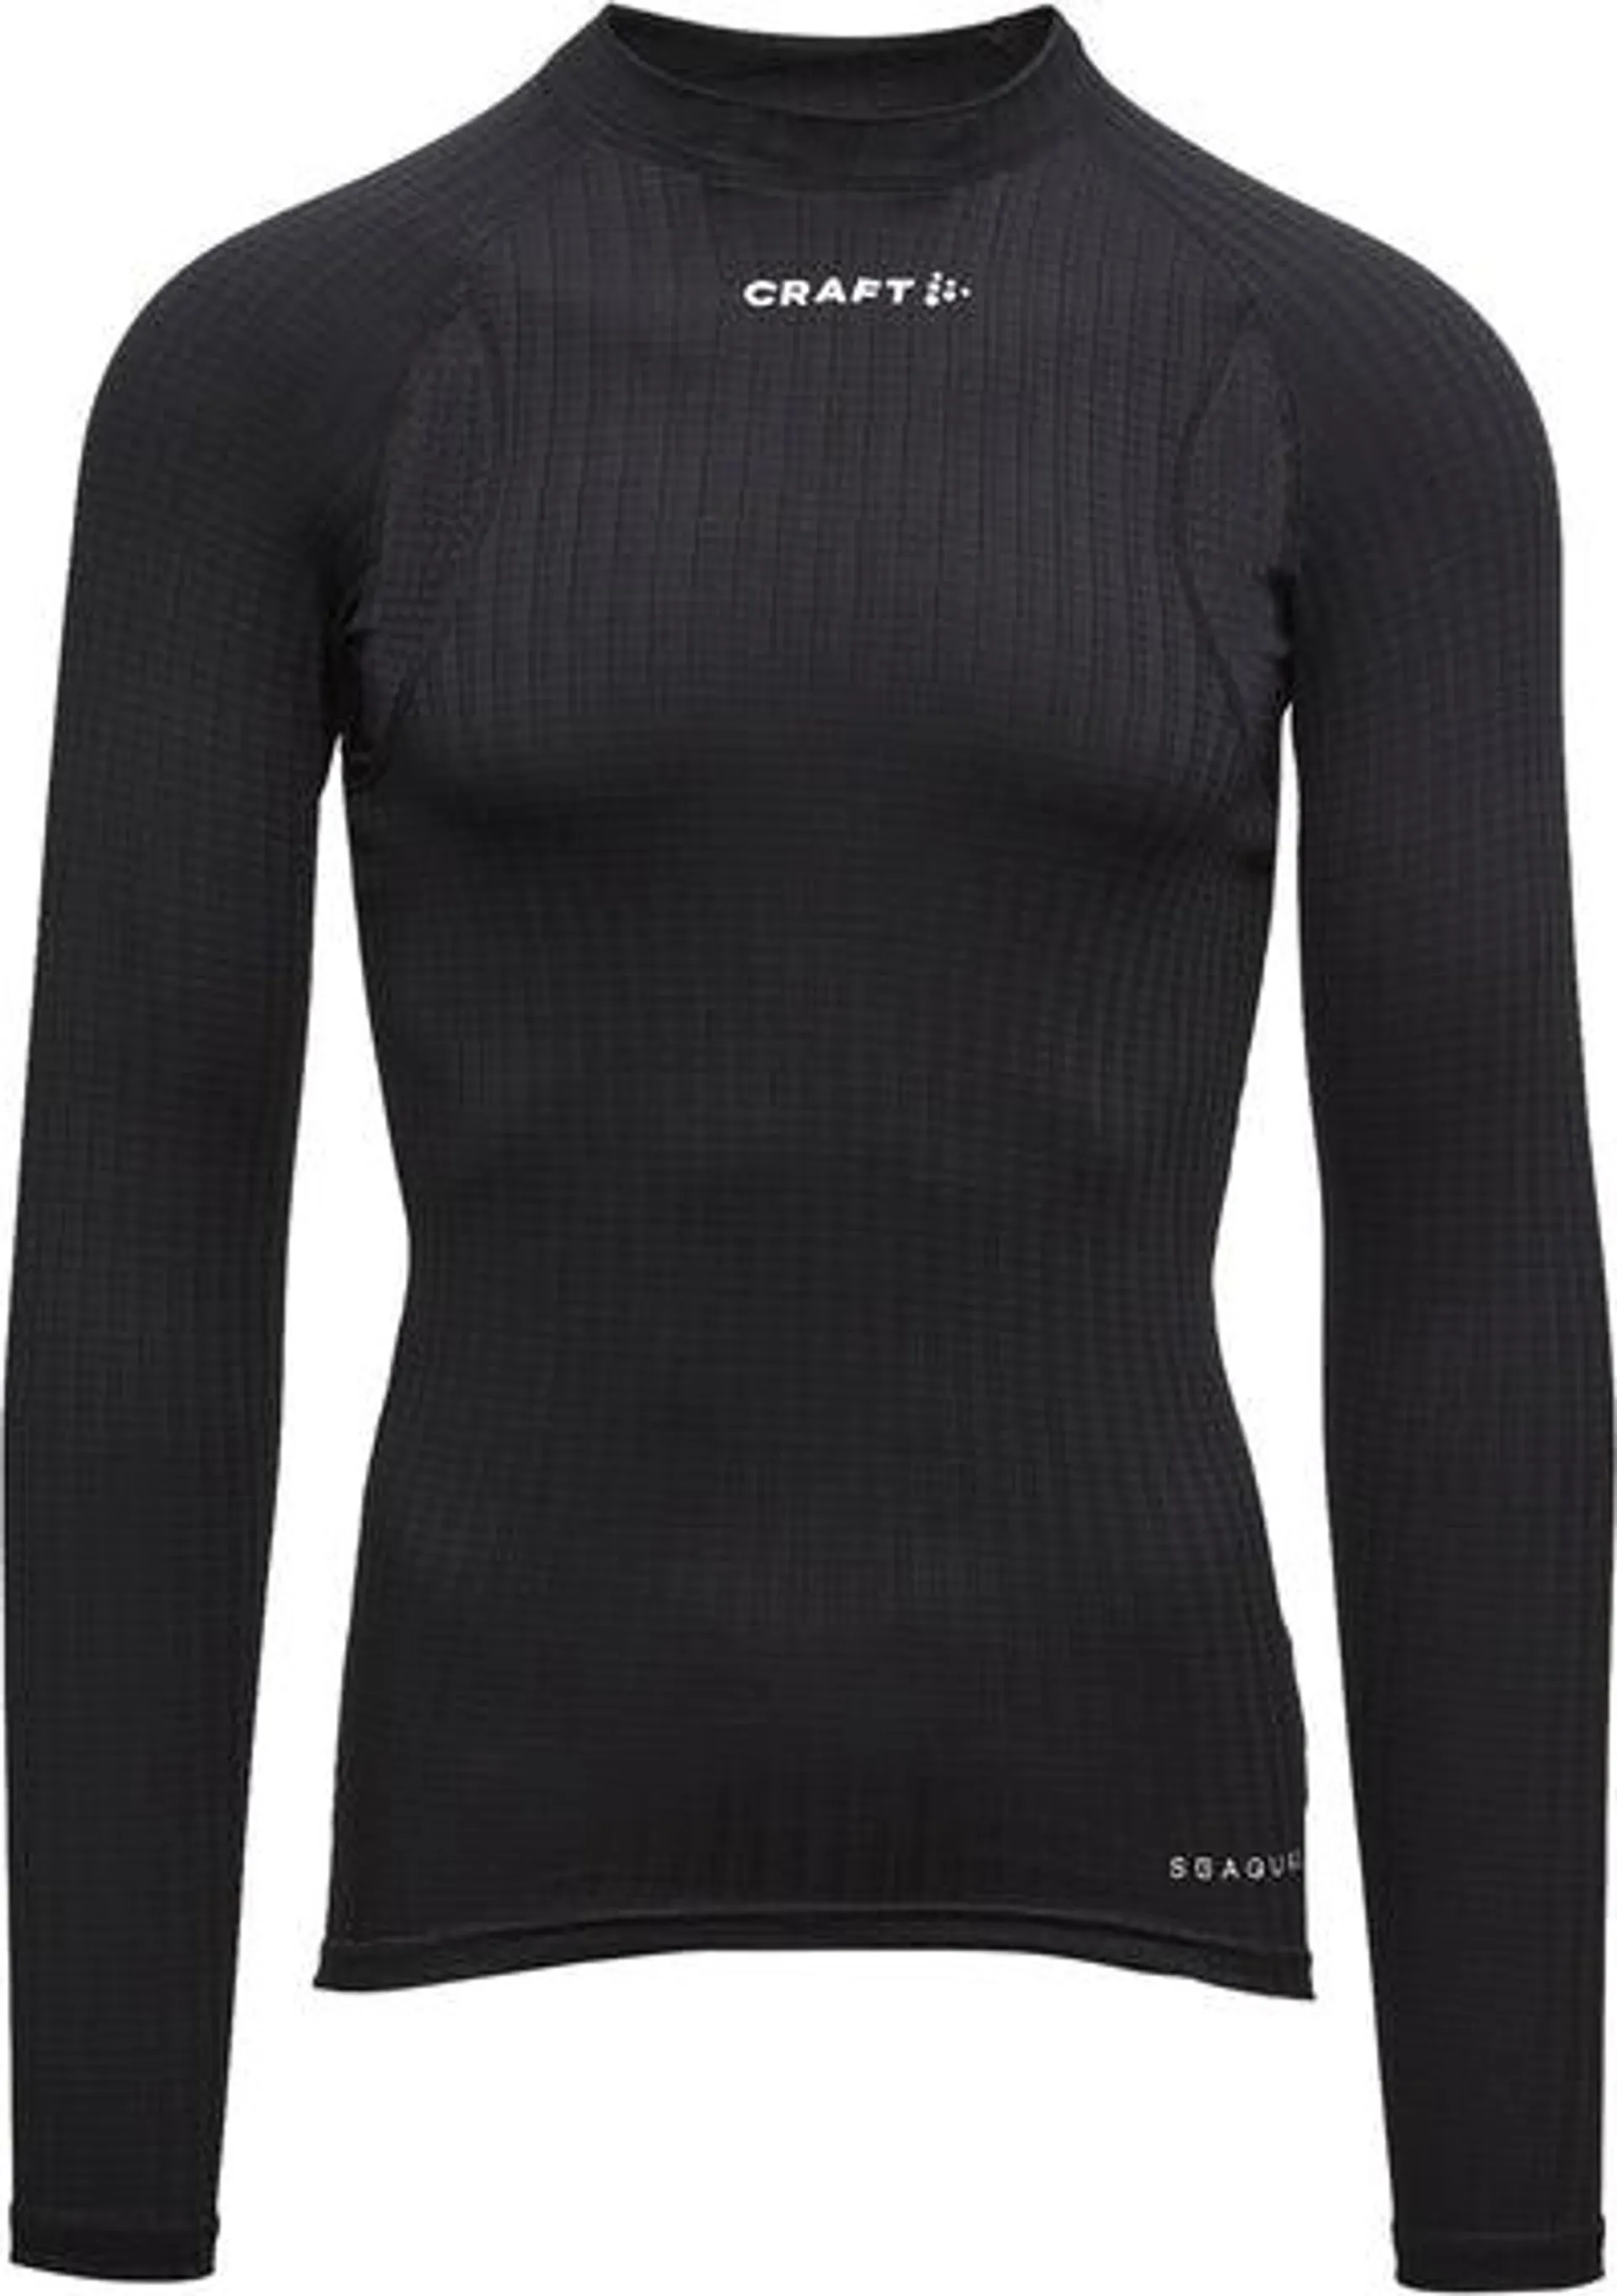 Active Extreme X CN Long Sleeve Baselayer Jersey - Men's